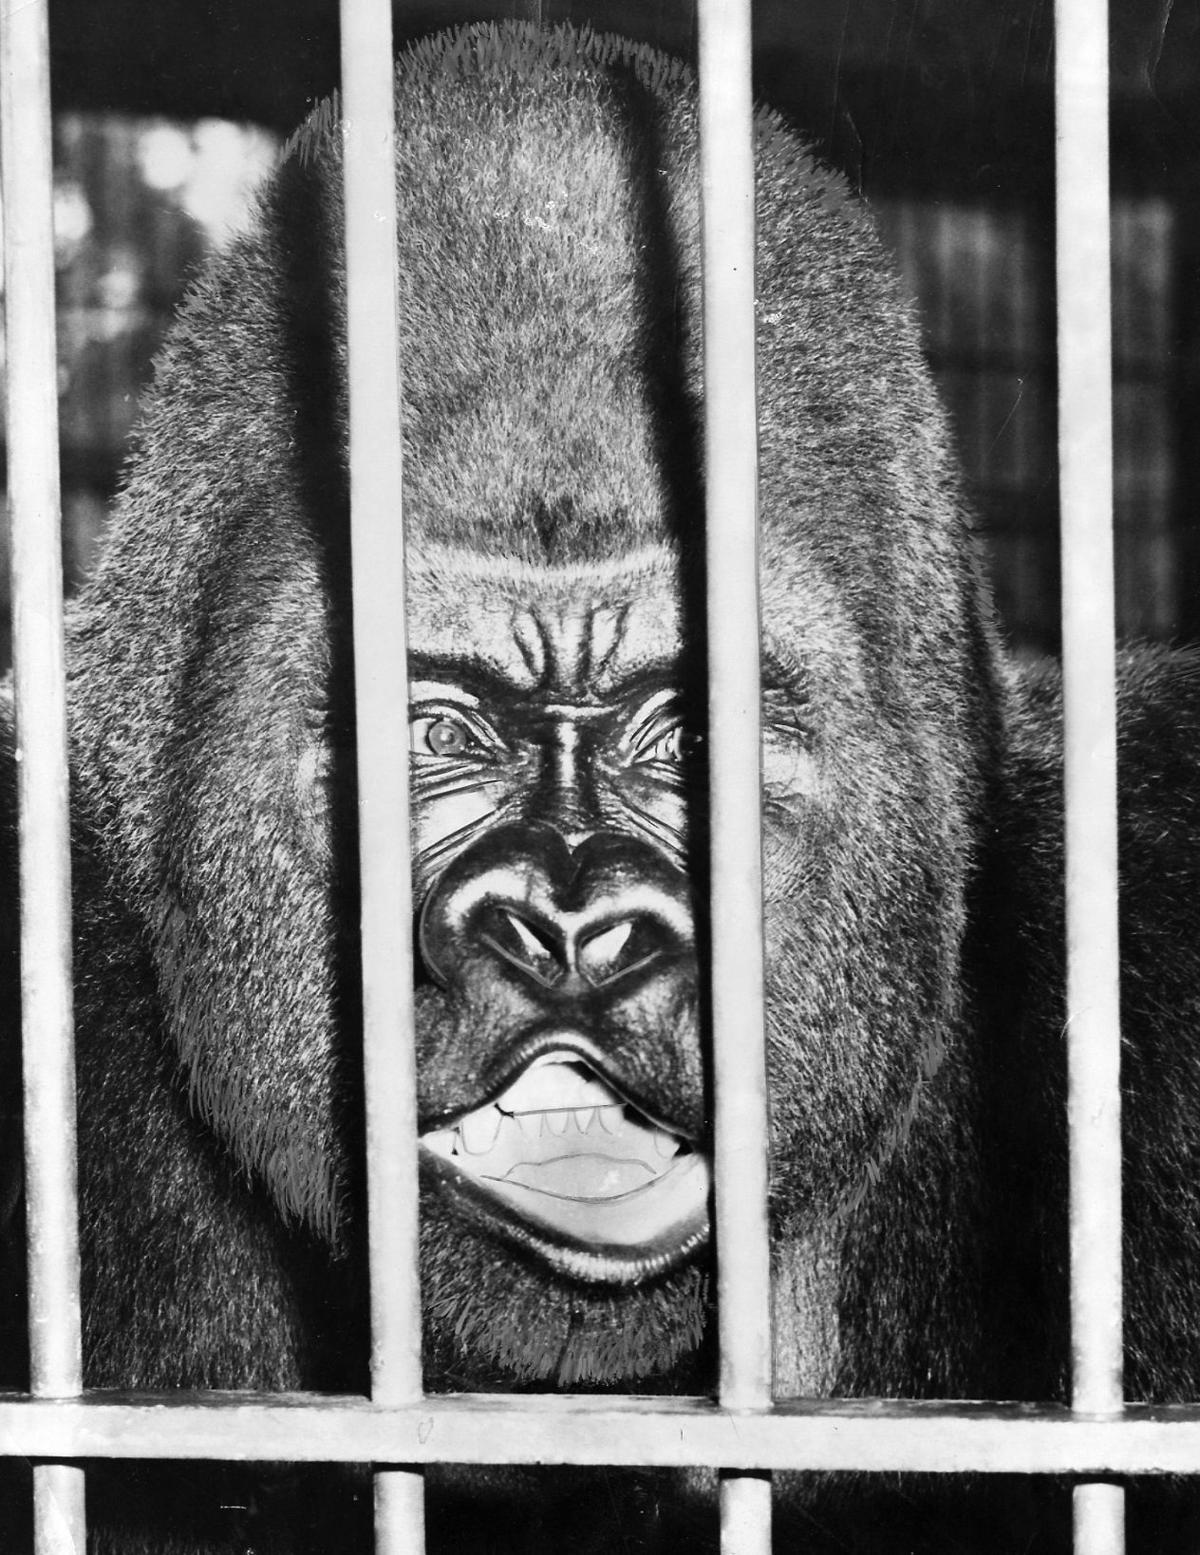 Dec. 1, 1958: Phil the gorilla dies after a hunger strike | History | 0